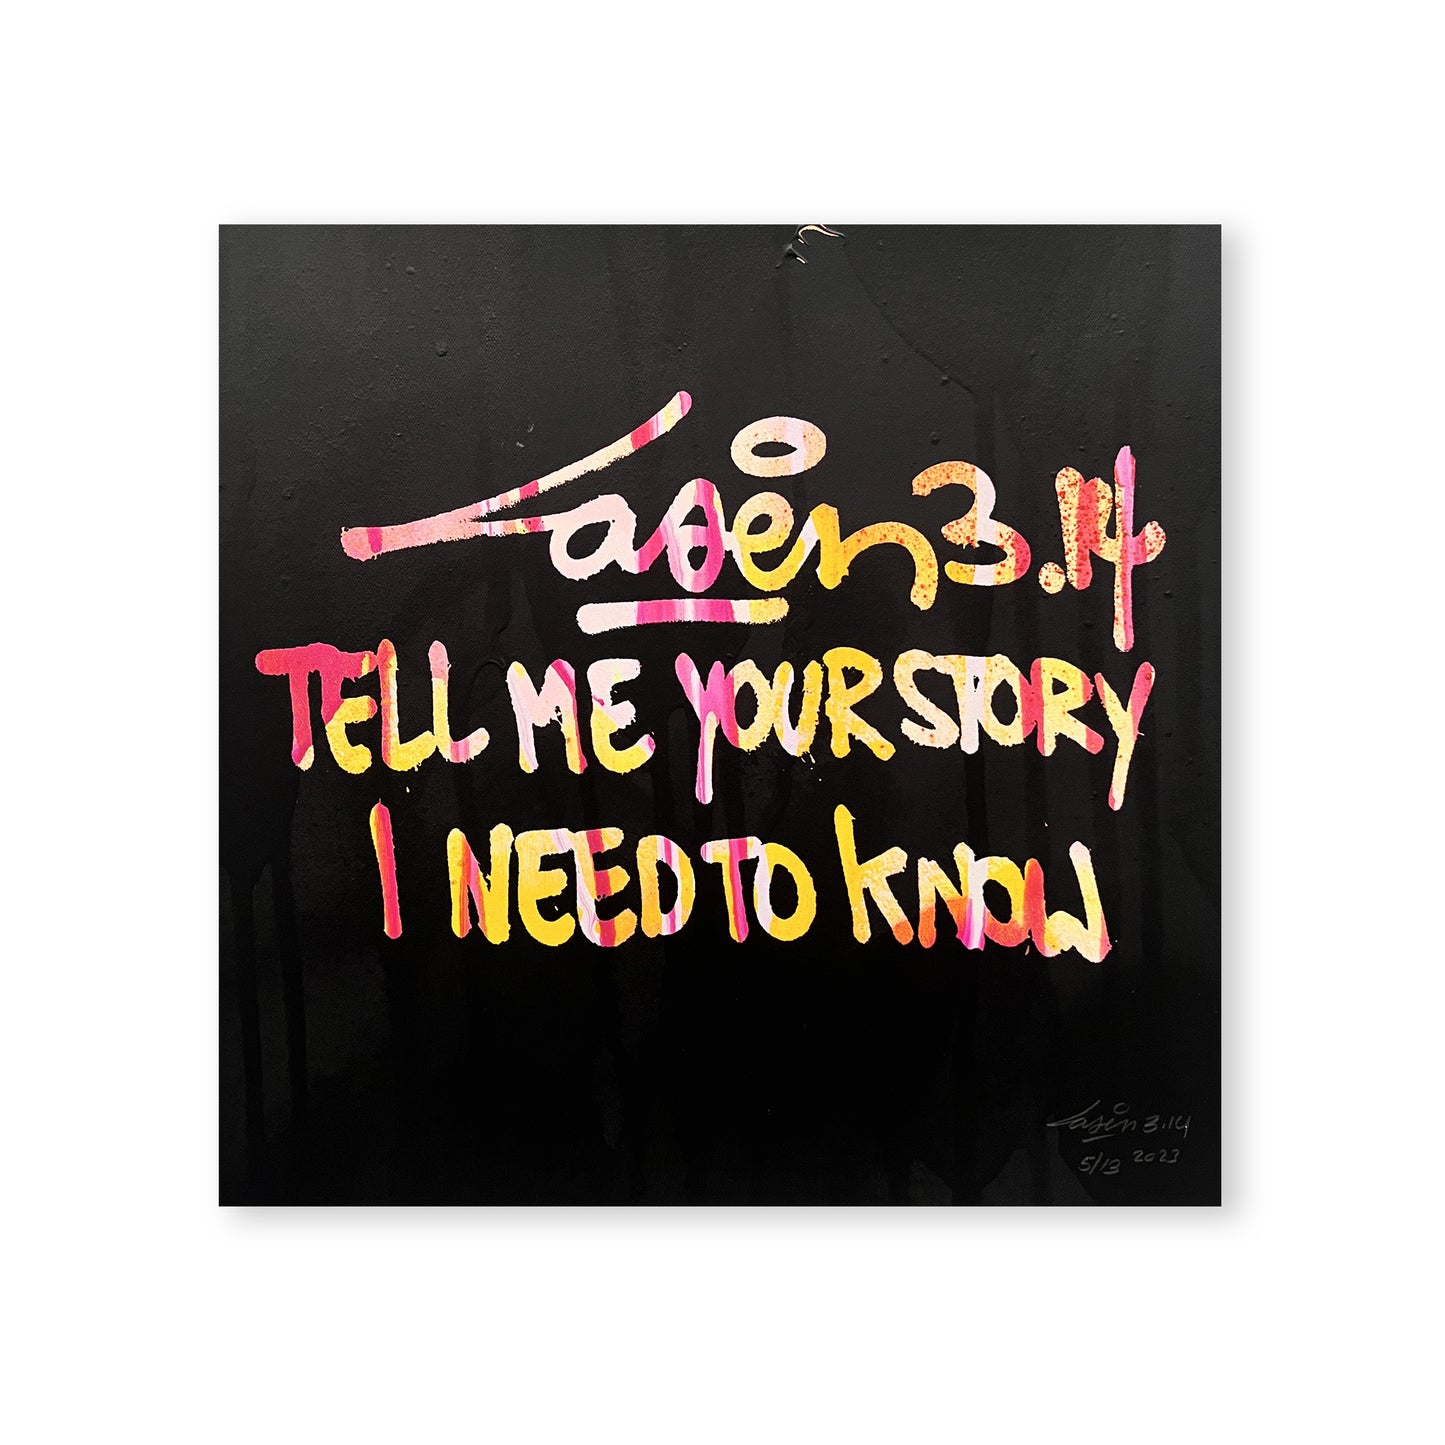 Tell Me Your Story I Need To Know 5/12